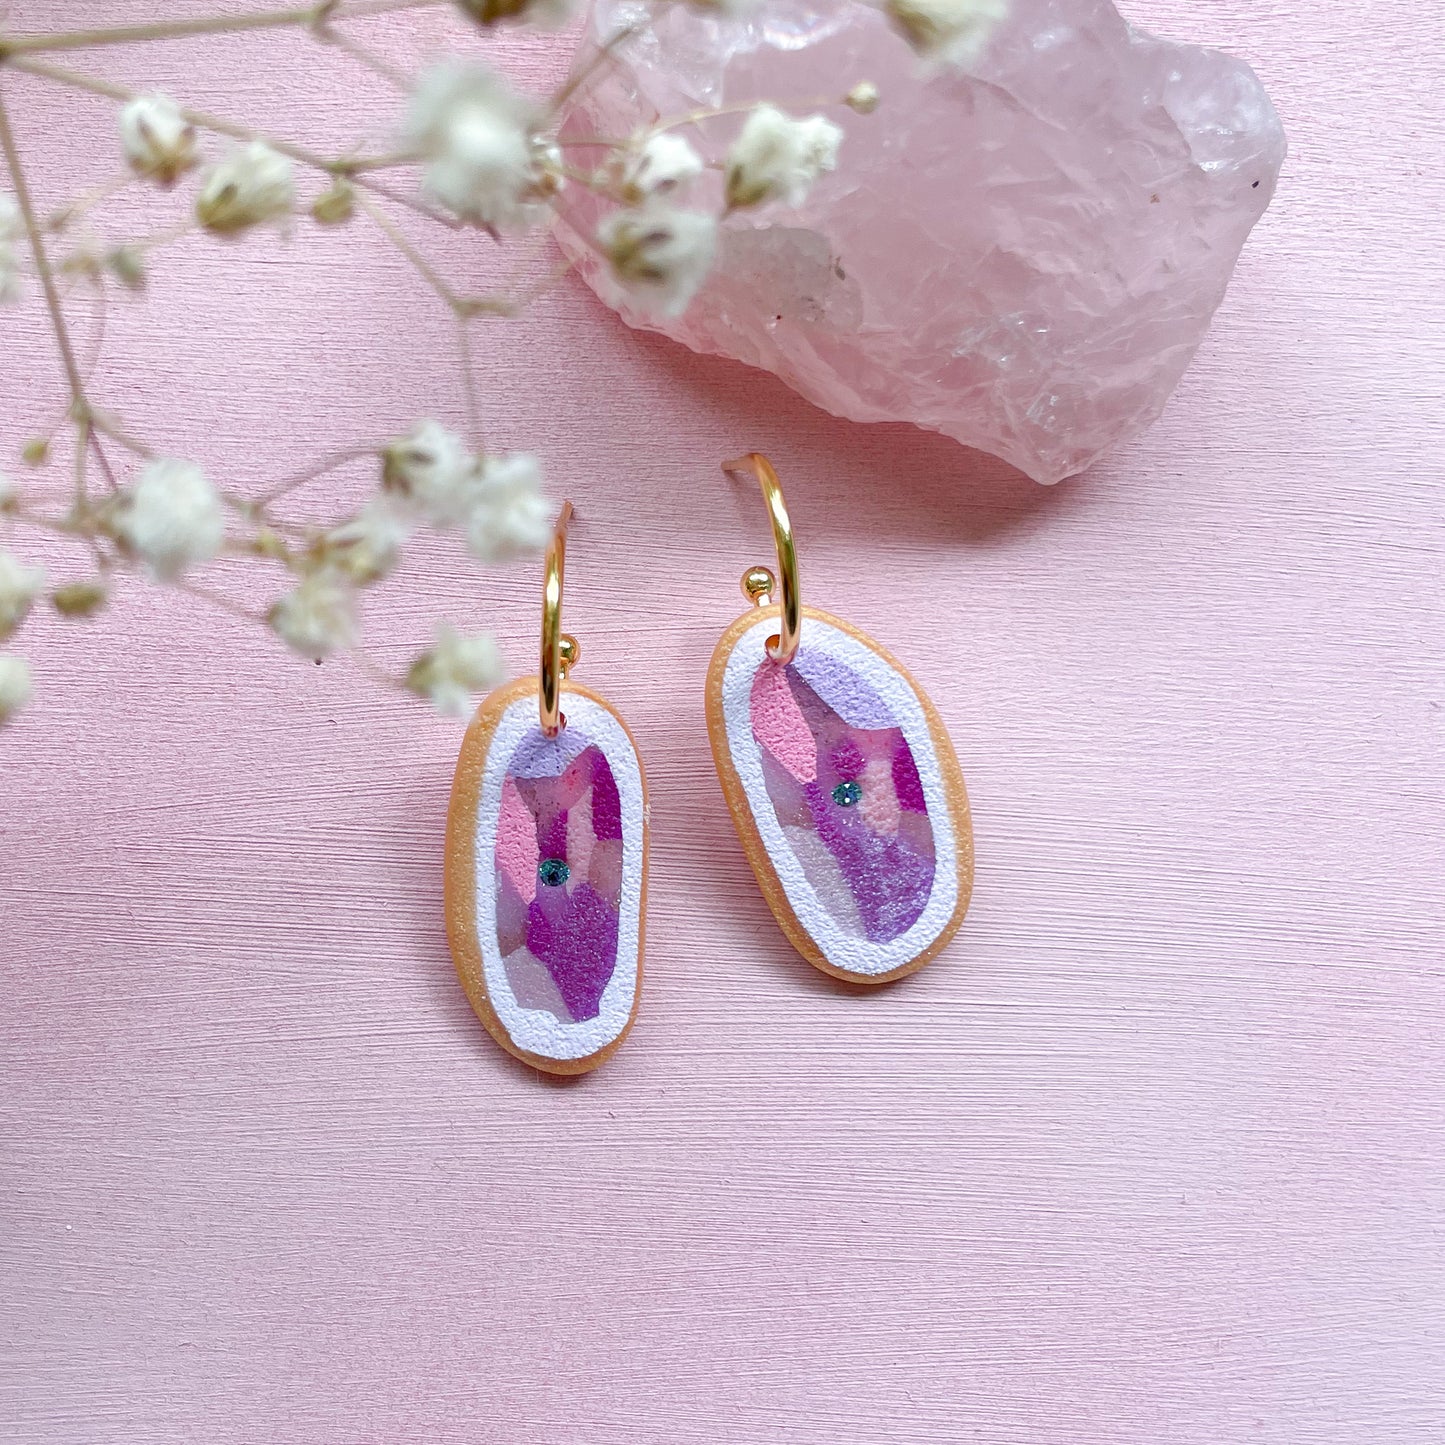 Shades of Purple | The Geode Collection